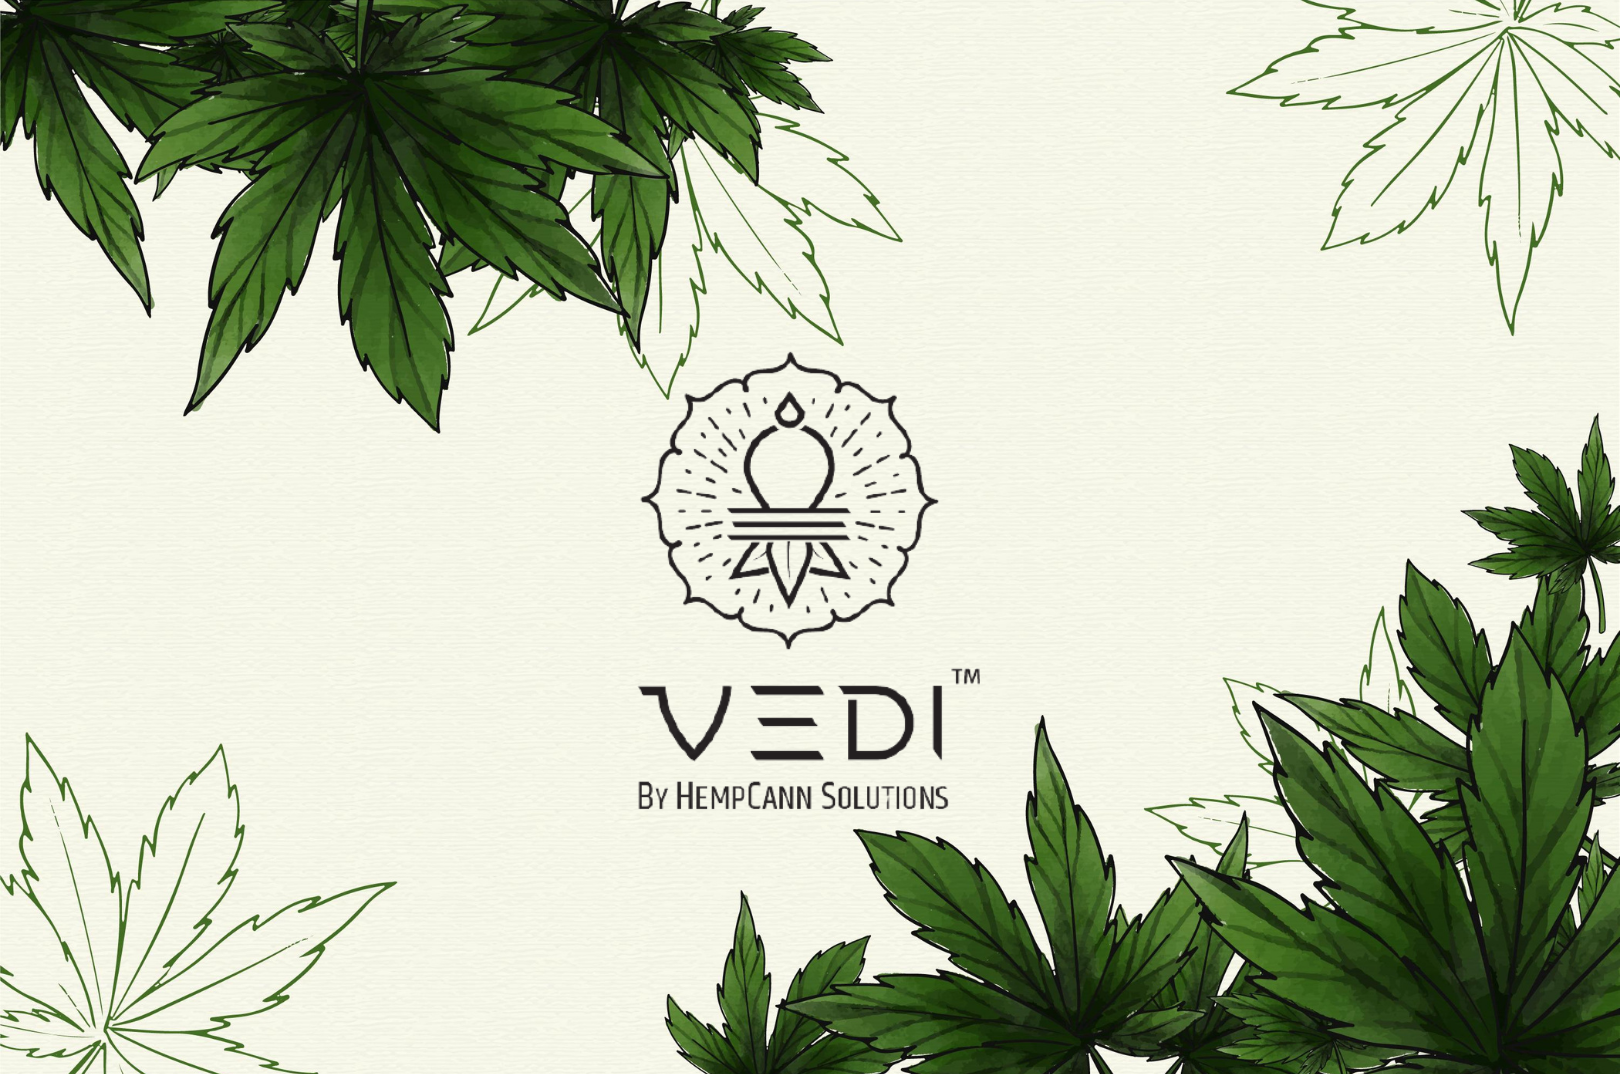 Is cannabis Medicine Available in India?